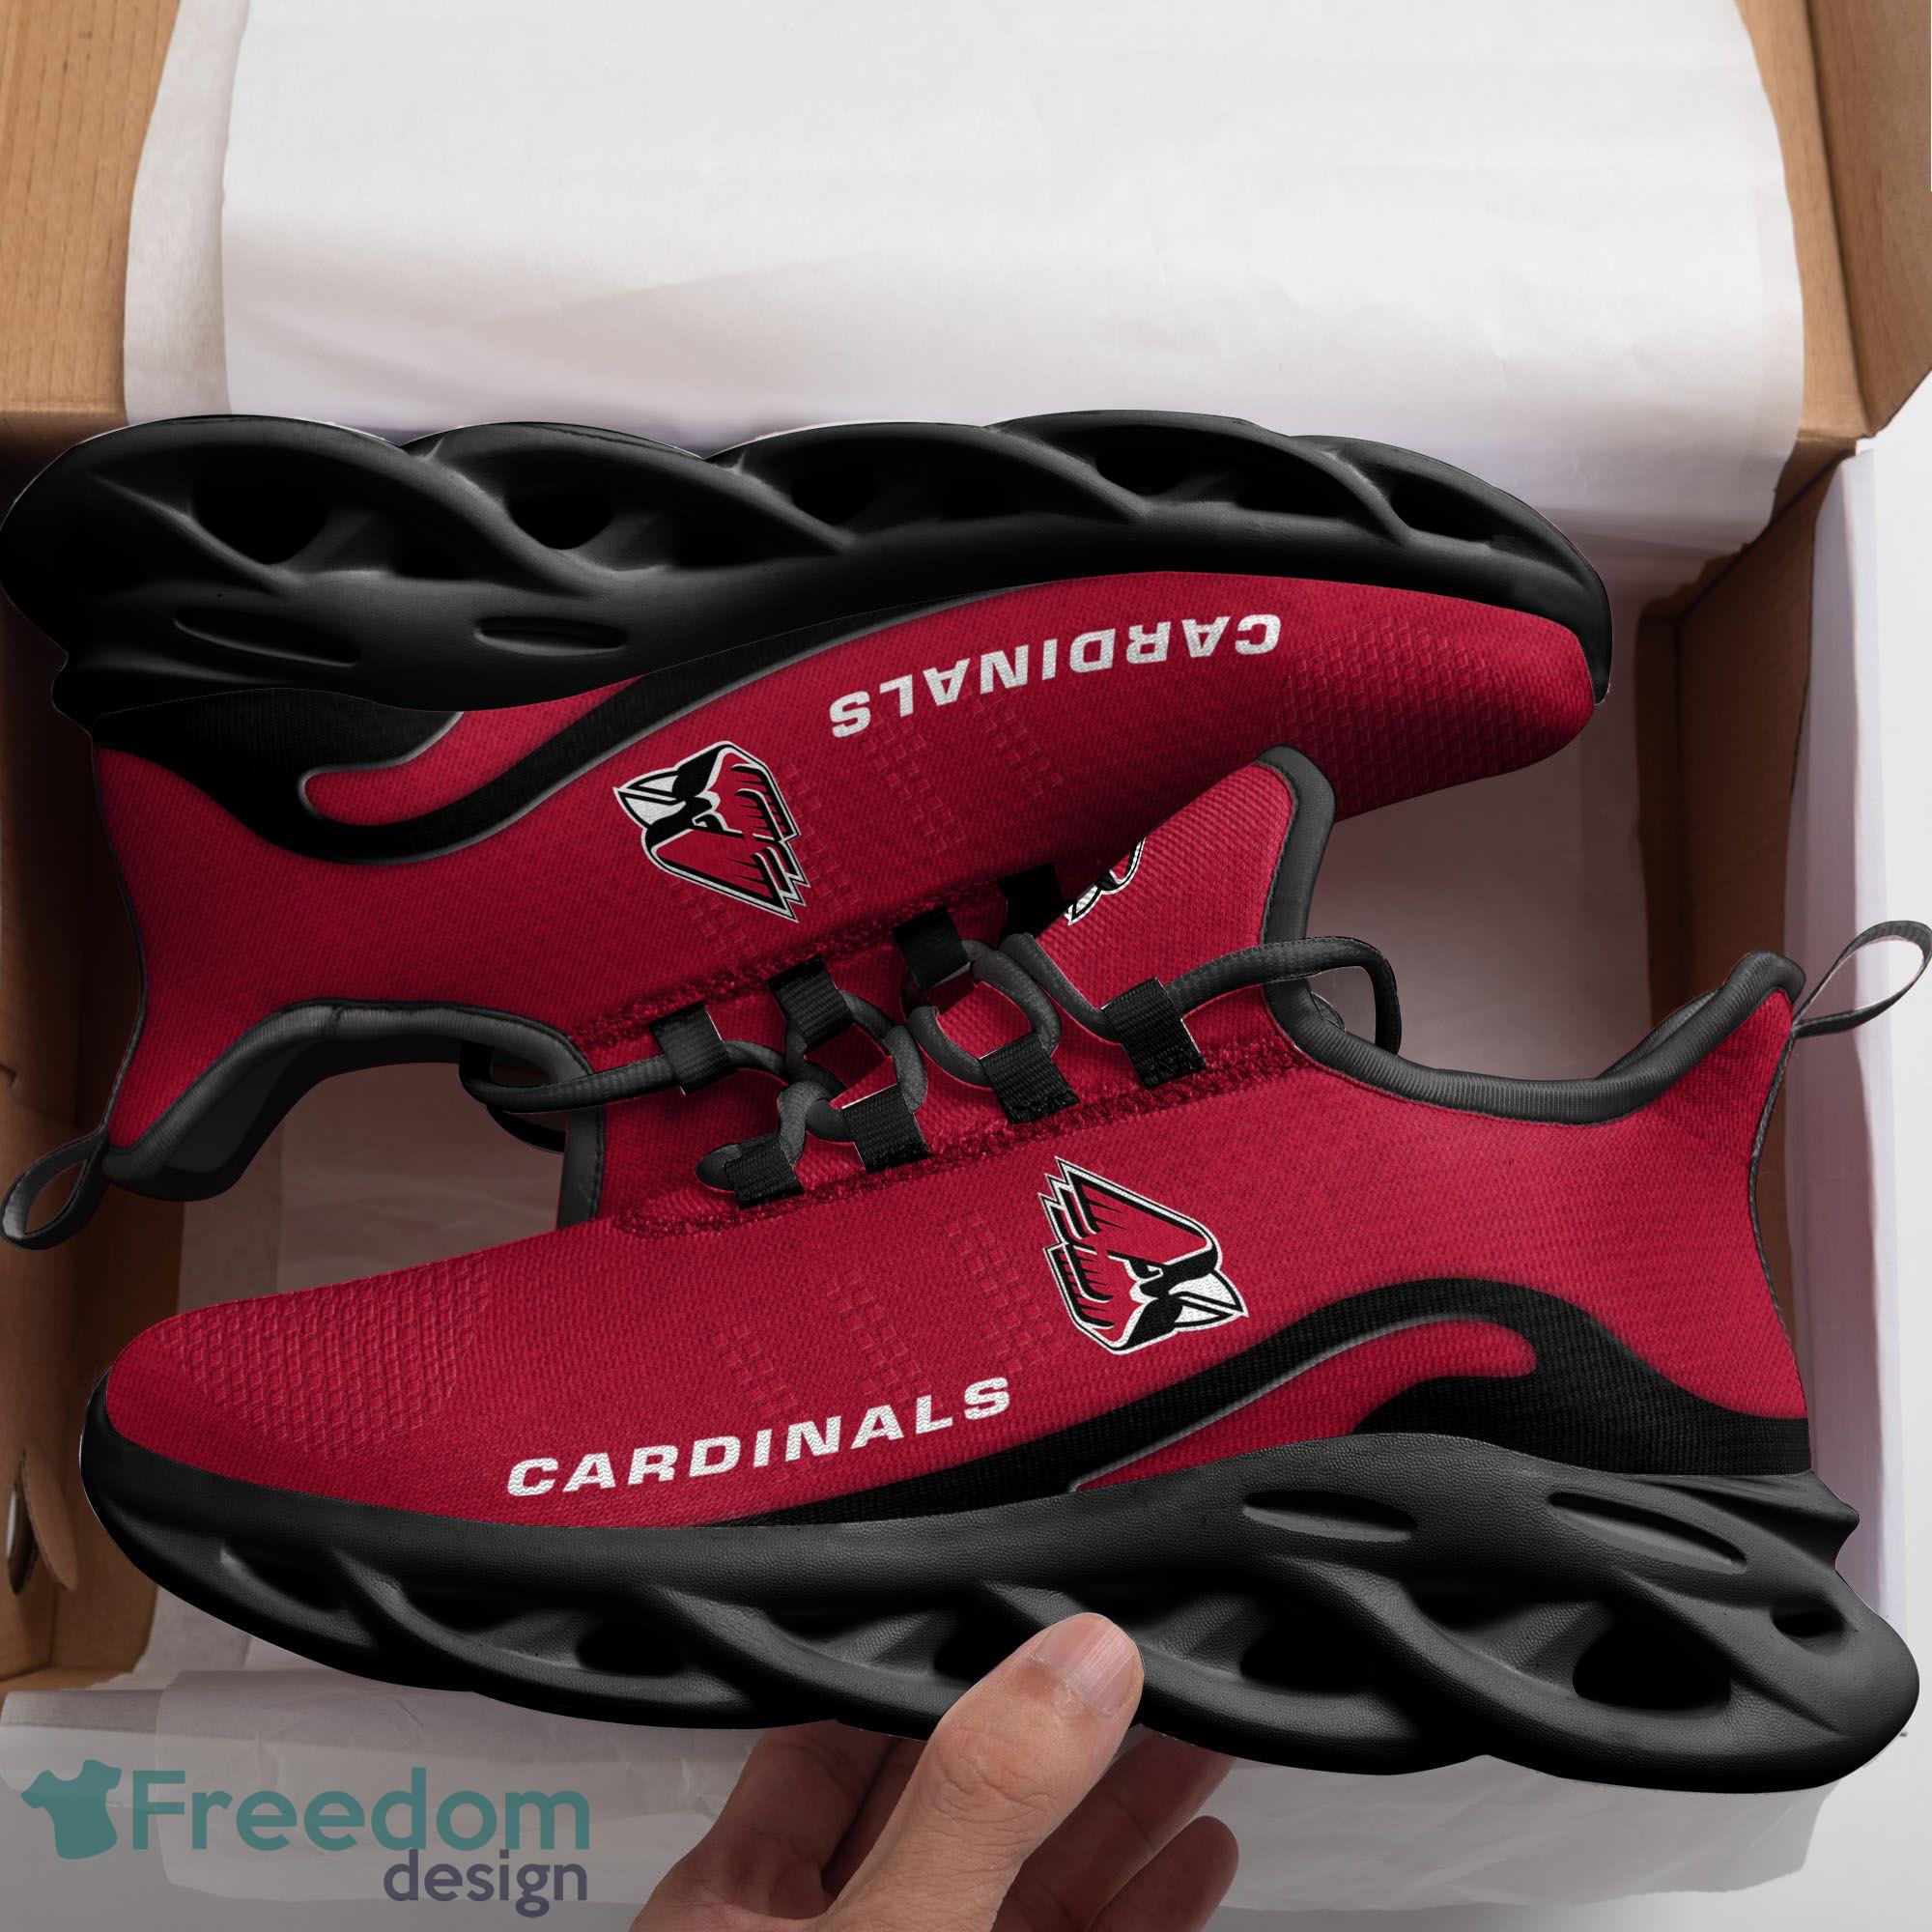 Louisville Cardinals Logo Torn Running Sneaker Max Soul Shoes In Red Gift  For Men And Women - Banantees